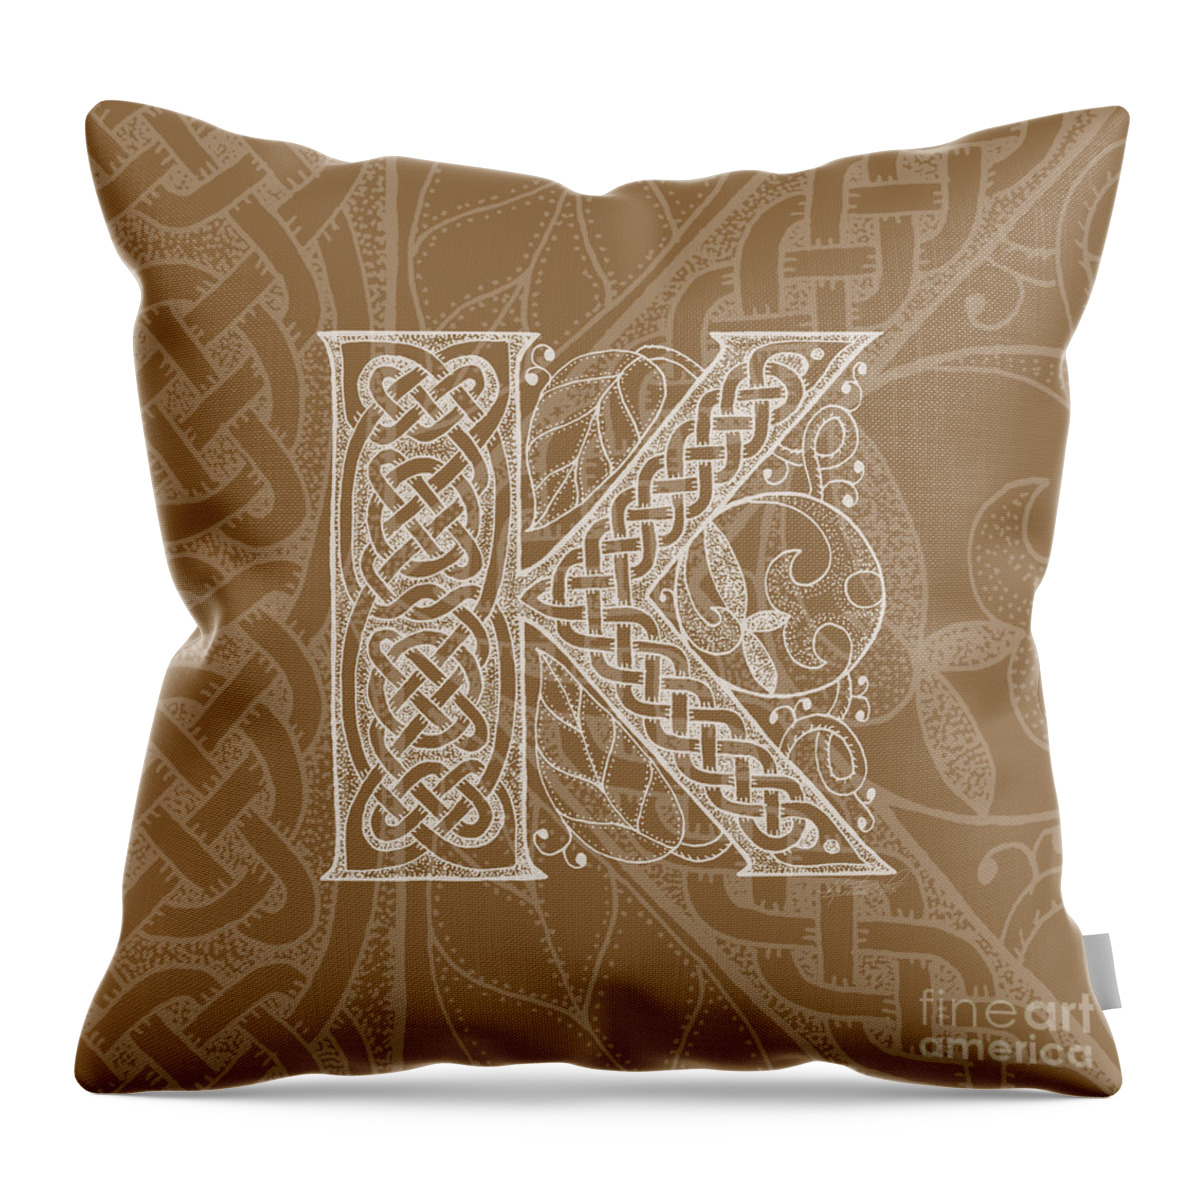 Artoffoxvox Throw Pillow featuring the mixed media Celtic Letter K Monogram by Kristen Fox